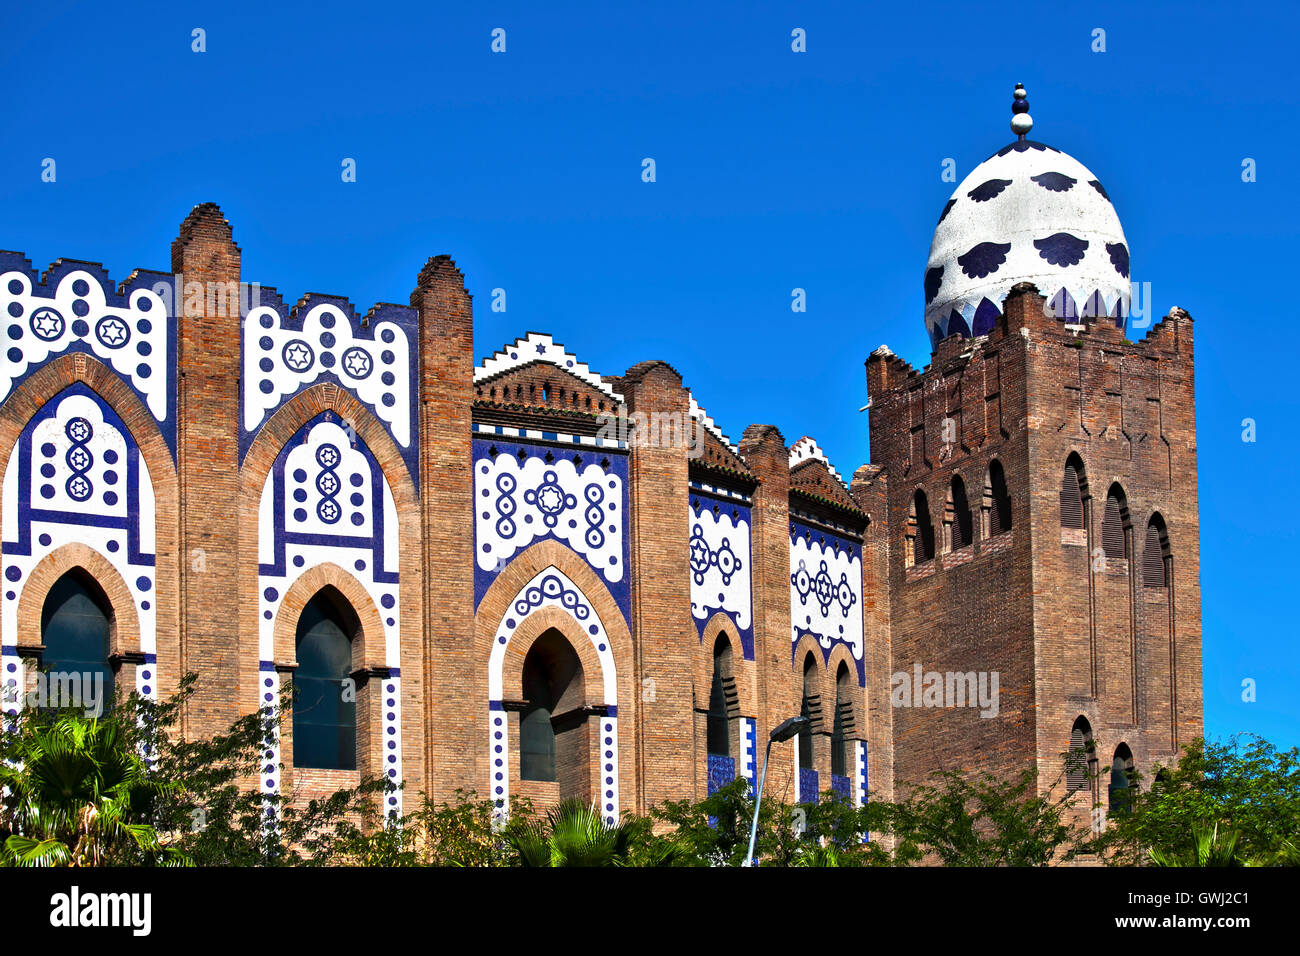 BARCELONA, SPAIN - JULY 31, 2015: The Plaza Monumental de Barcelona or known as La Monumental. It is a bullring and bullfighting Stock Photo